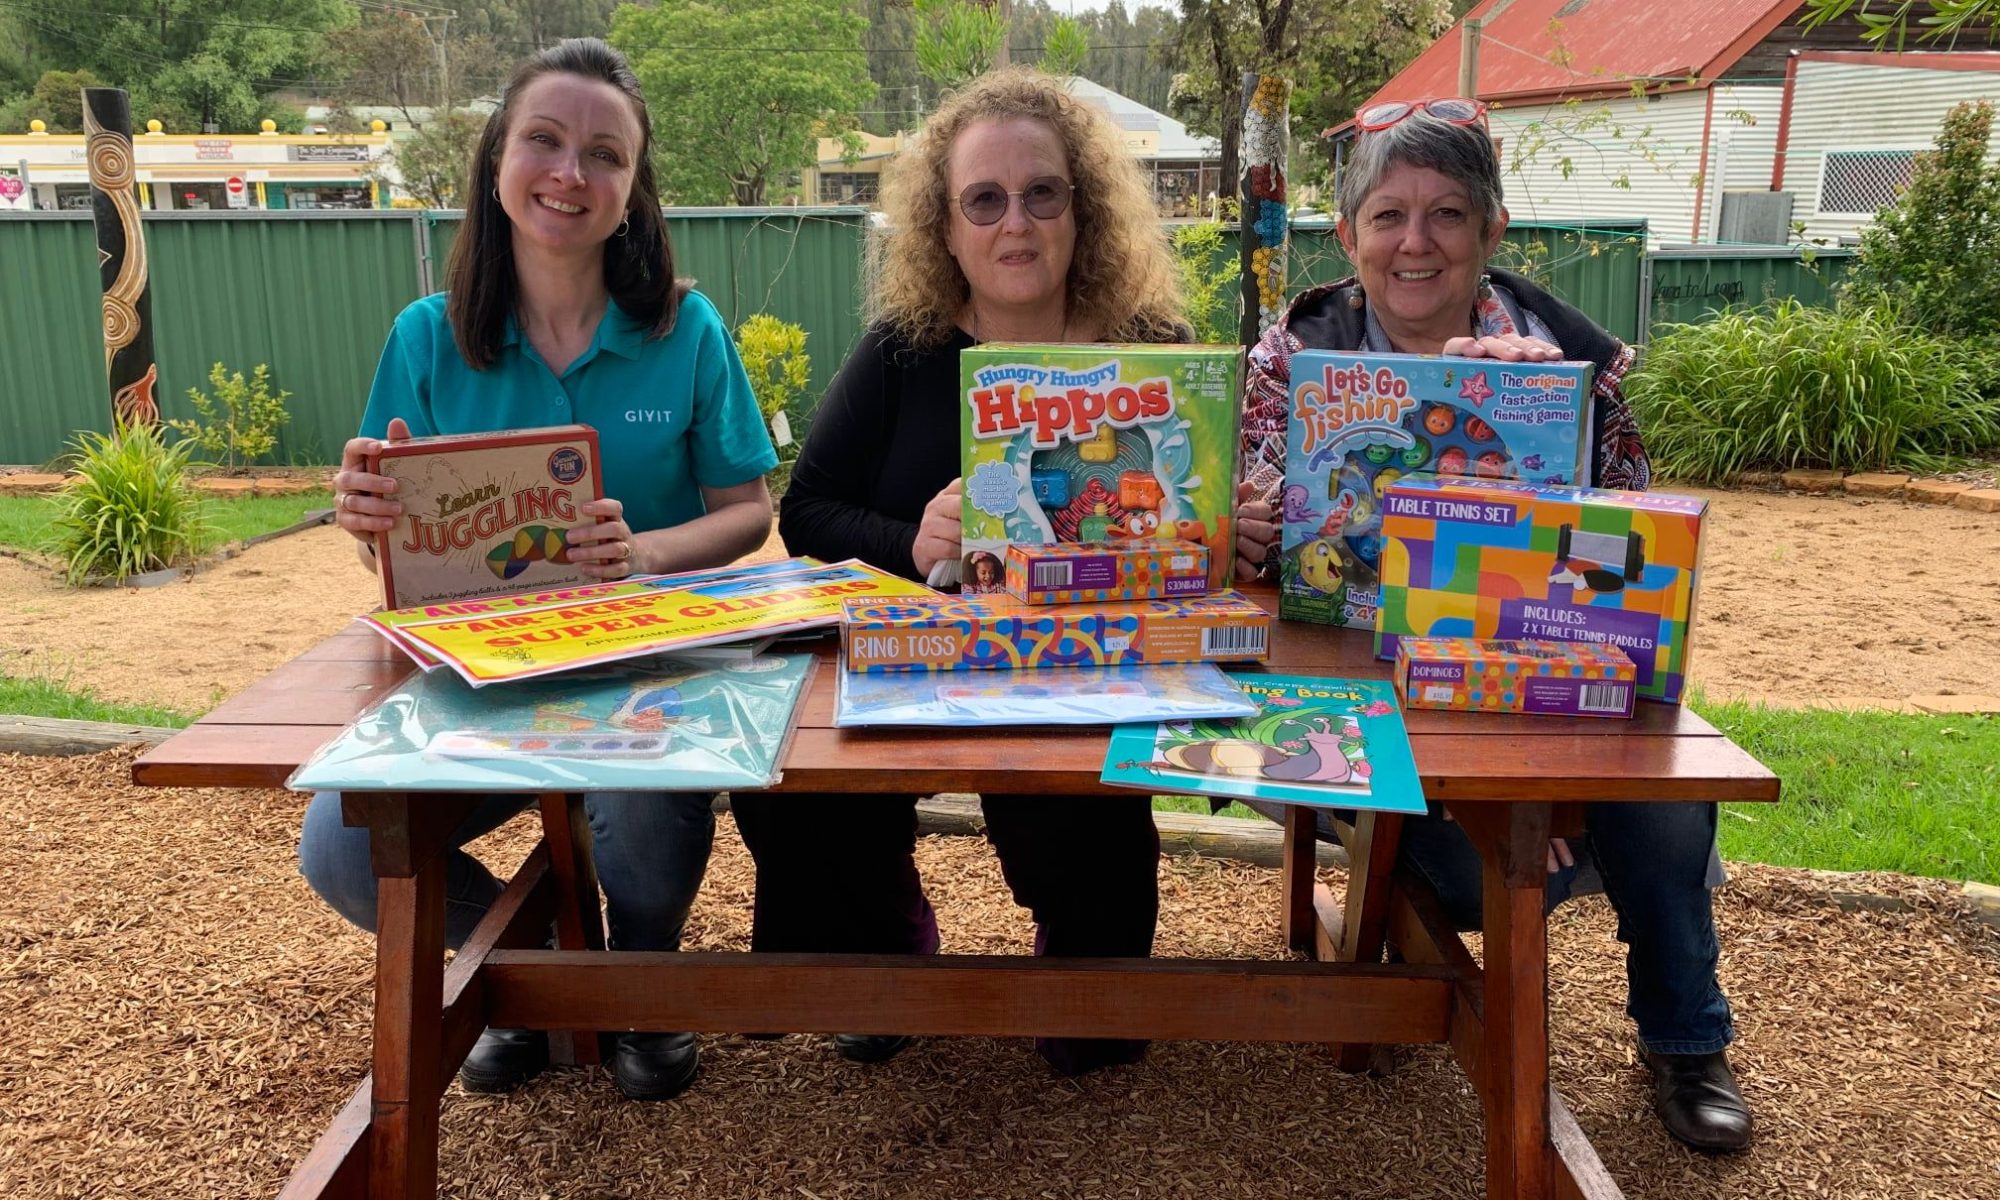 Three women sitting at a picnic table displaying a vairety of children's games, books and toys.